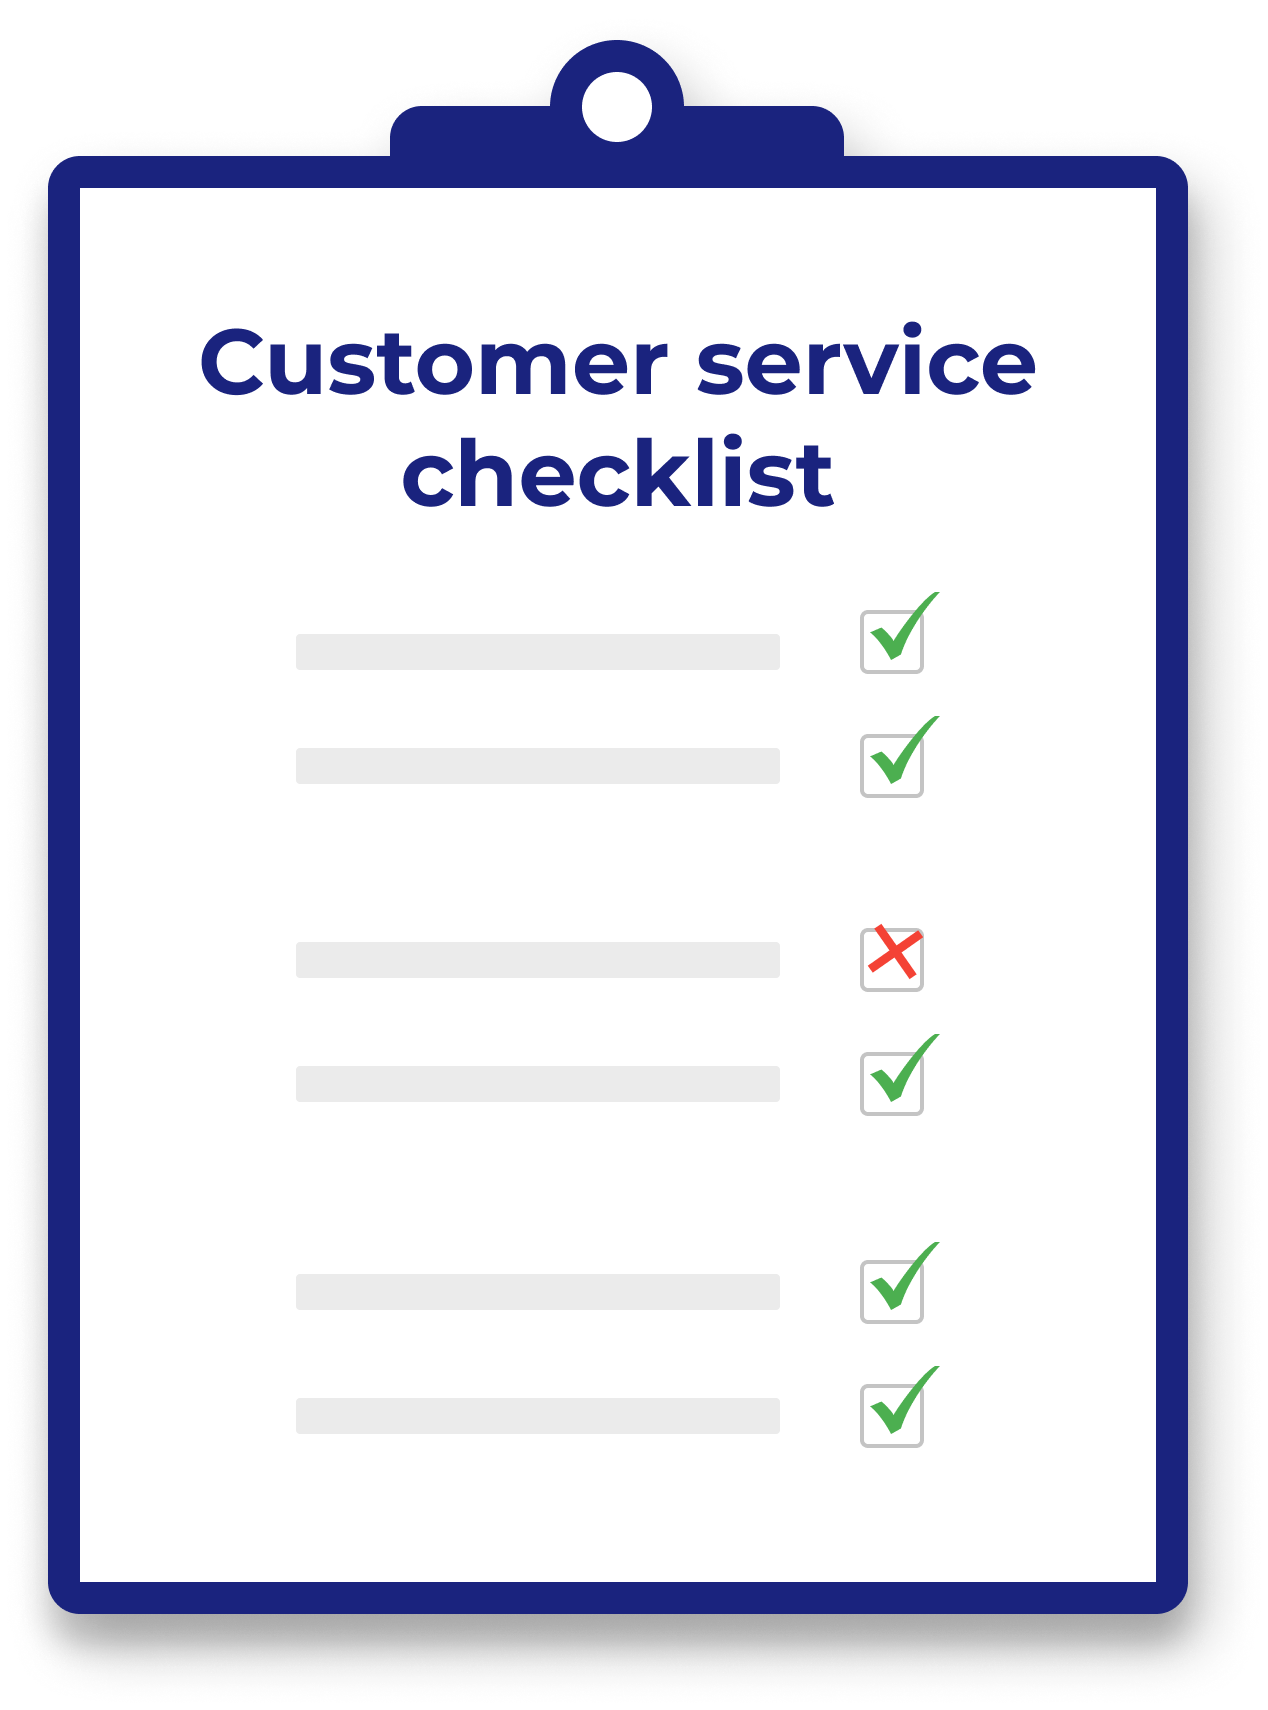 customer service checklist - 9 Skills Every Bar Manager Should Have